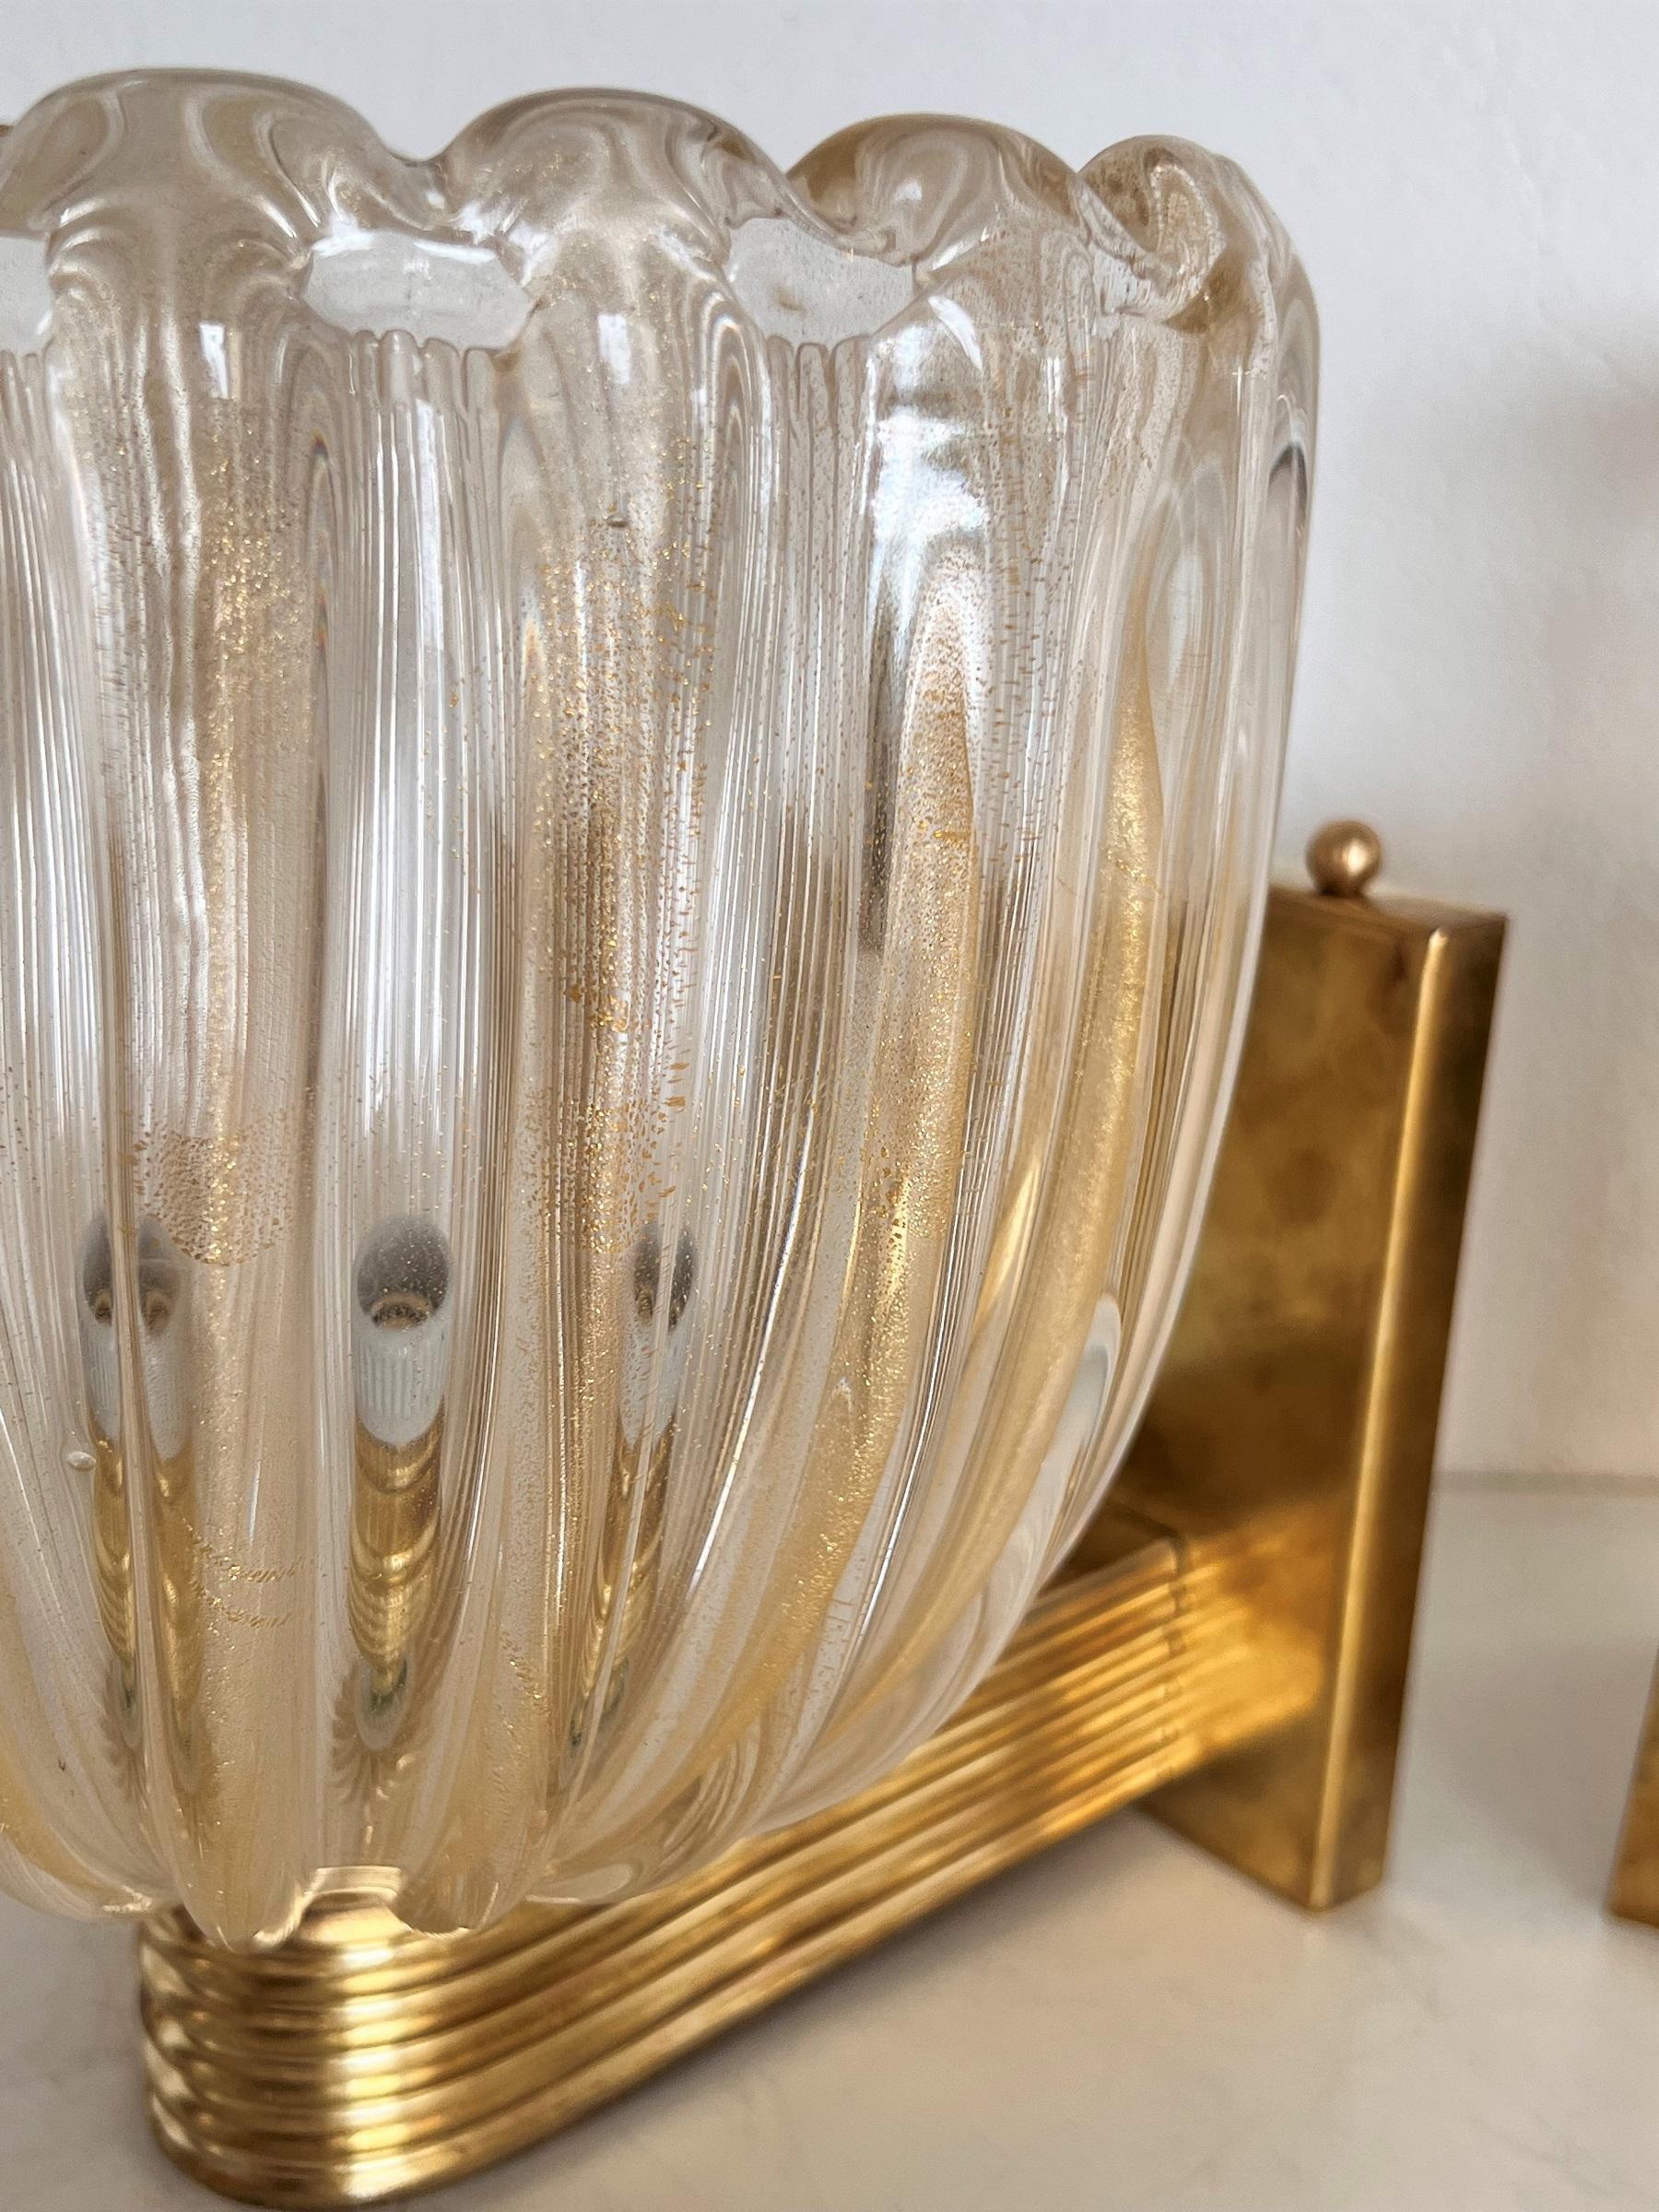 Italian Brass and Murano Glass Wall Lights or Sconces in Art Deco Style, 1990s 8